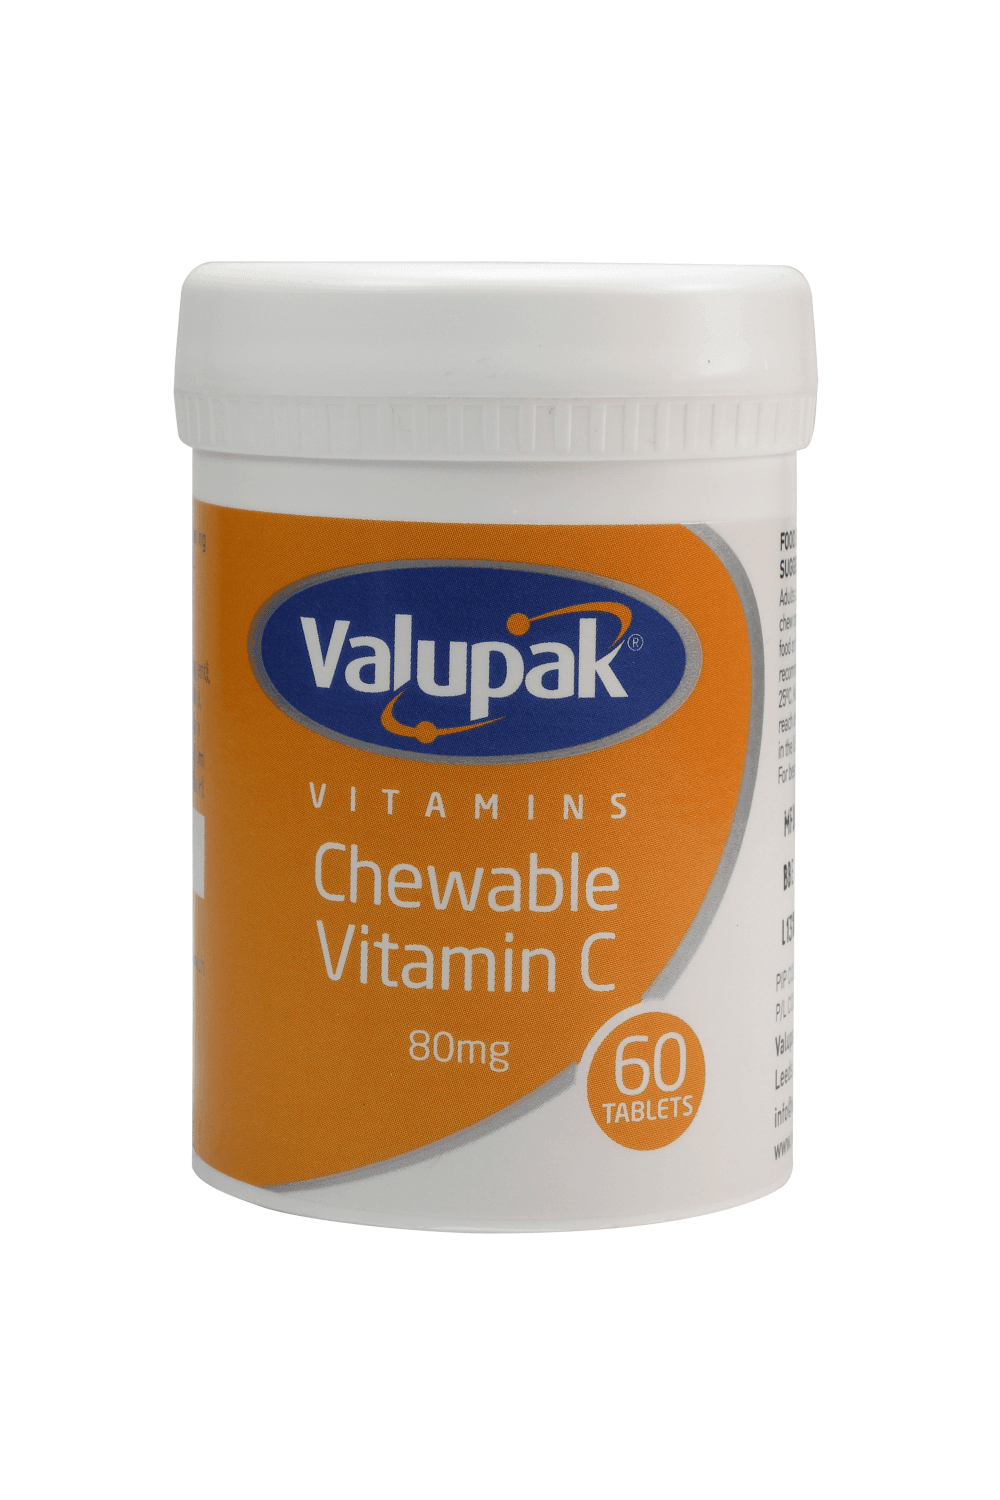 Valupak Chewable Vitamin C Tablets 80mg Pack of 60 - welzo